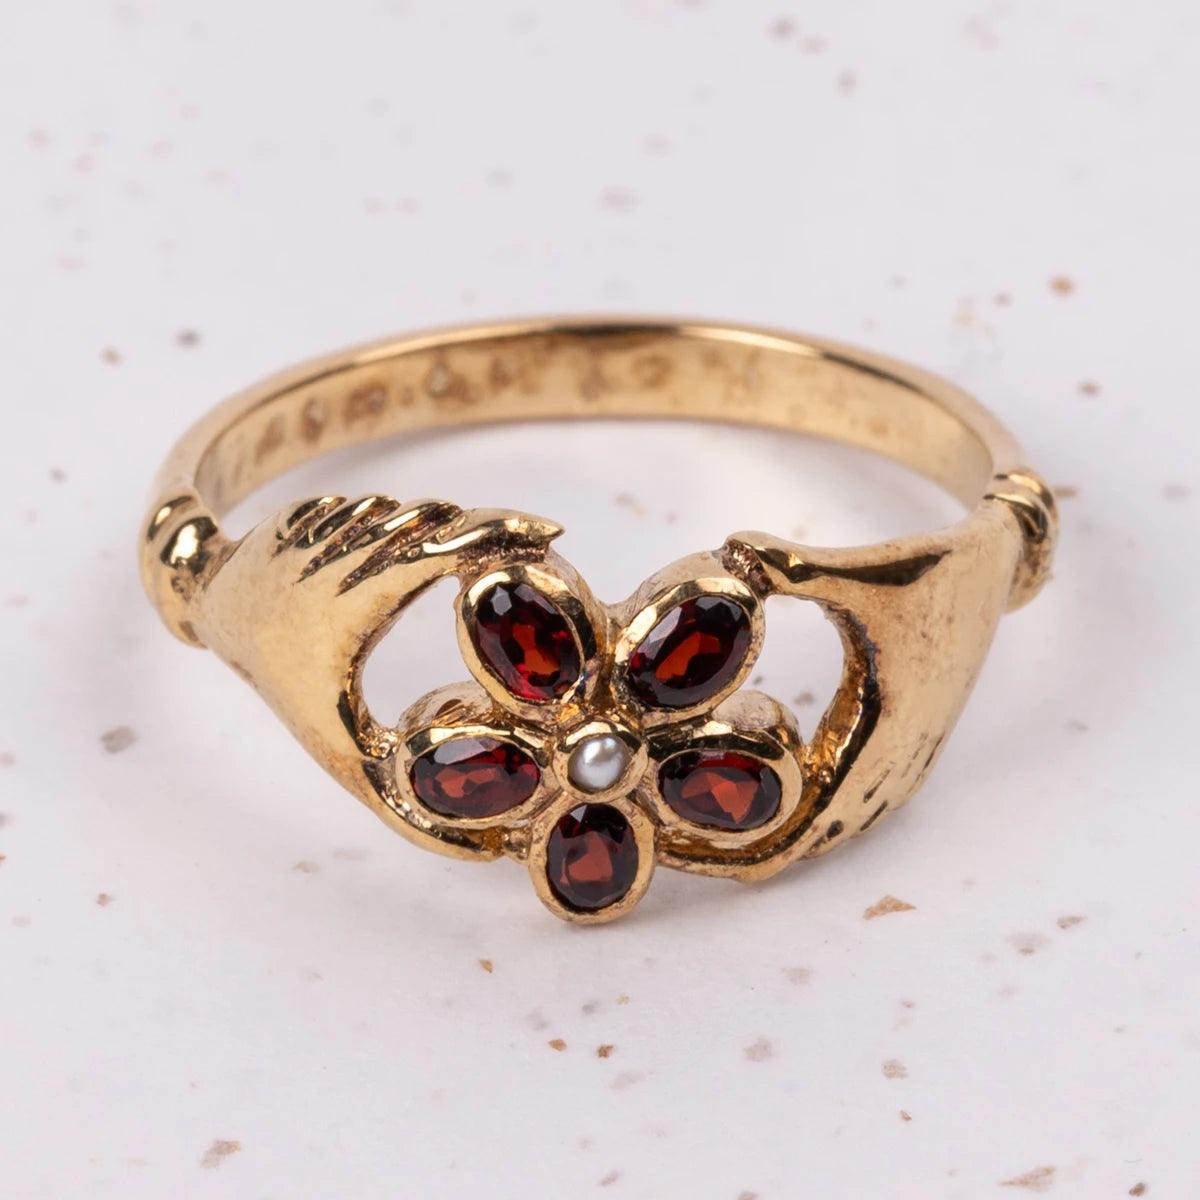 Jane Austen Gold Plated with Garnet and Pearl Regency Ring - JaneAusten.co.uk